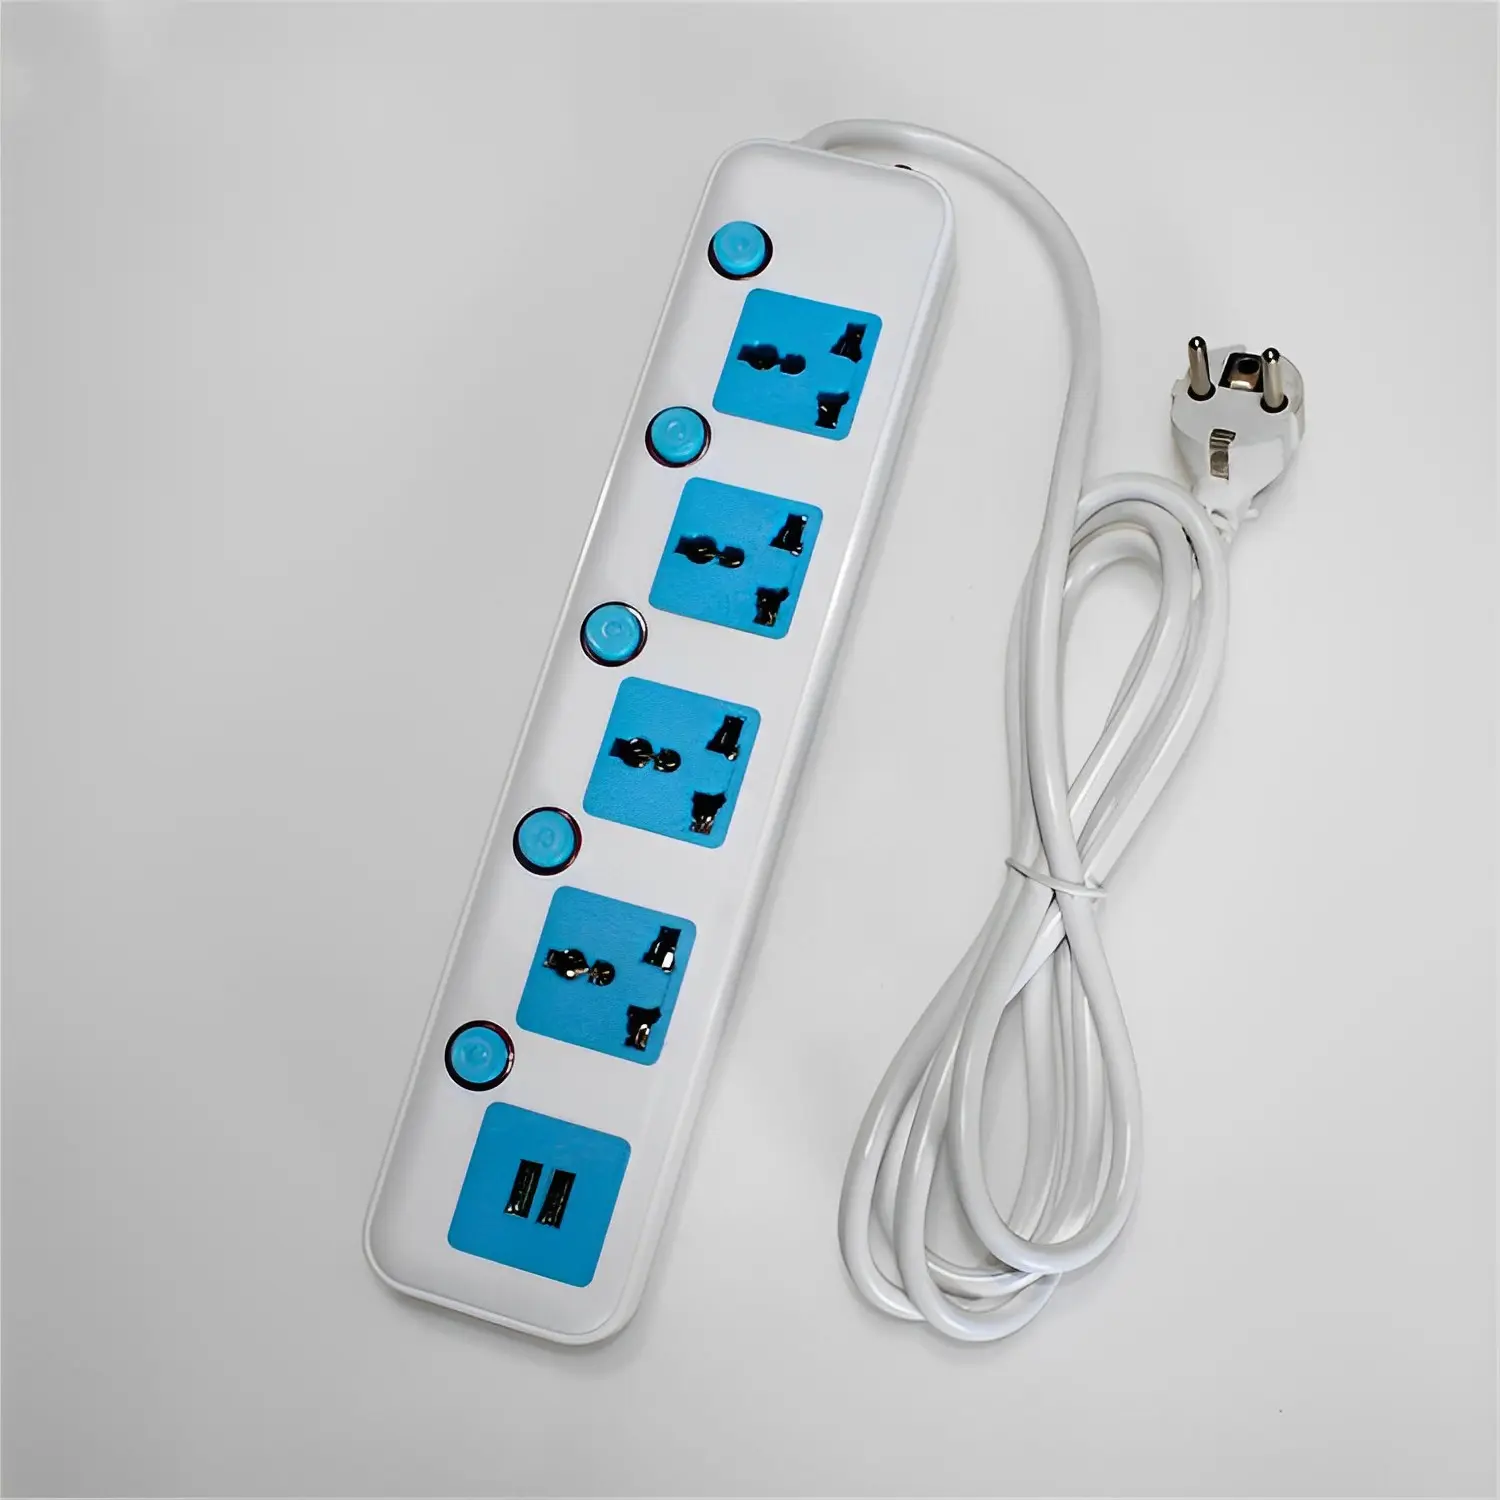 Extension Lead With USB Plugs And Sockets Extension Wire Electric 3 Way Multi Plug Socket